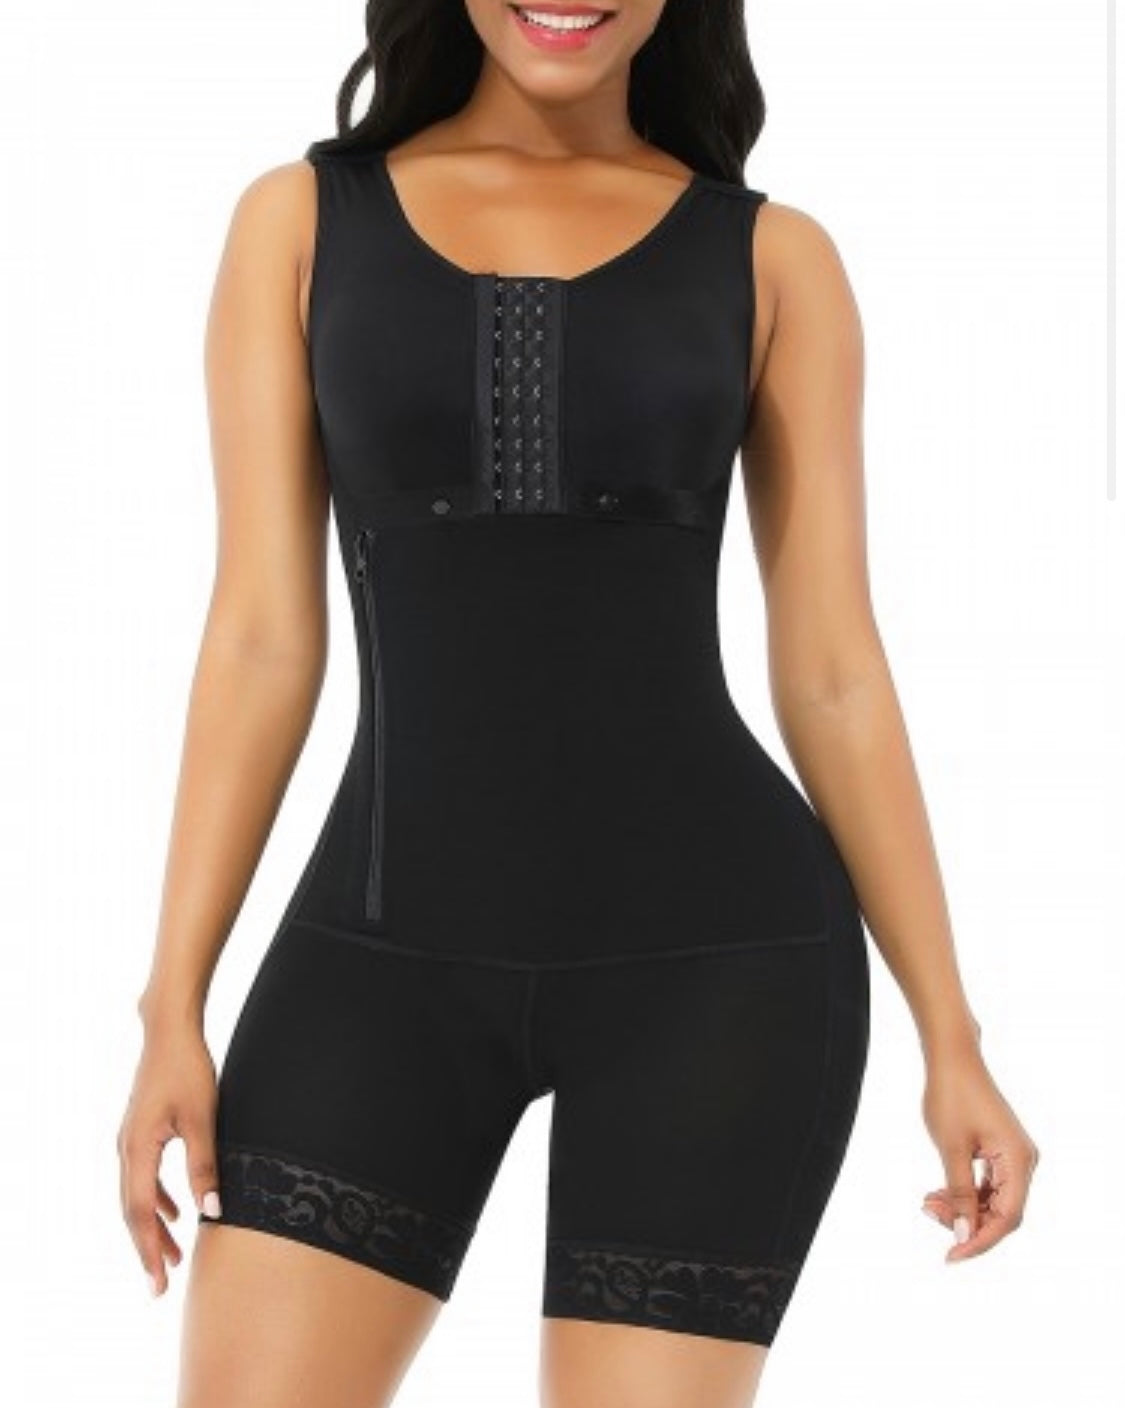 Full body Shape wear zipper and open crotch – Upsetdem Collection